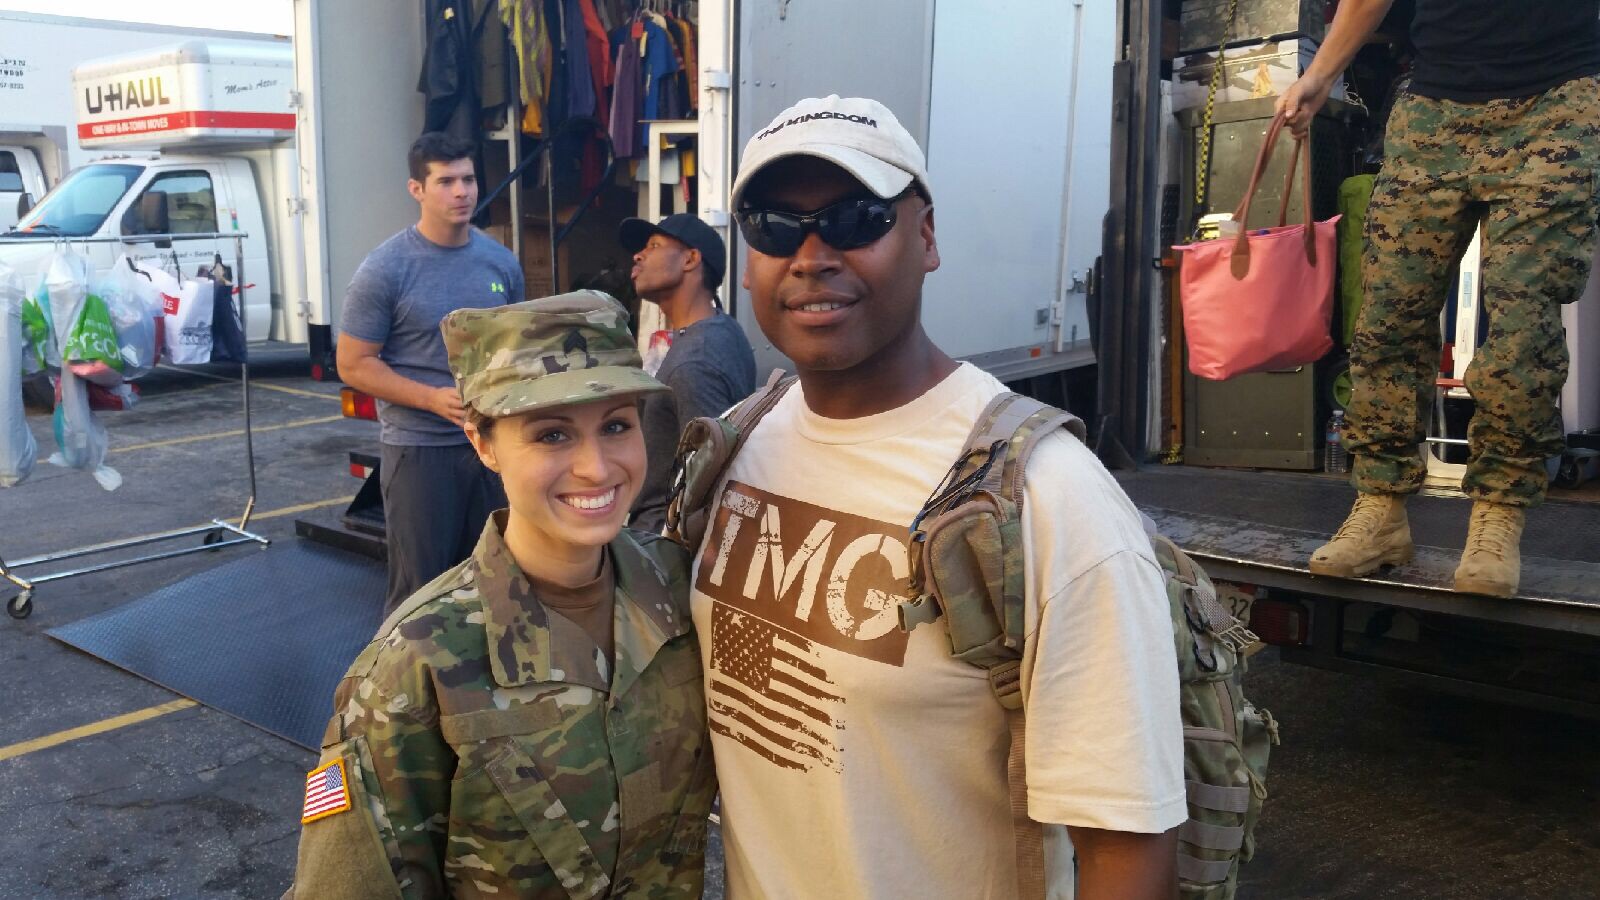 Behind the scenes of USAA national commercial as female soldier at the ATM